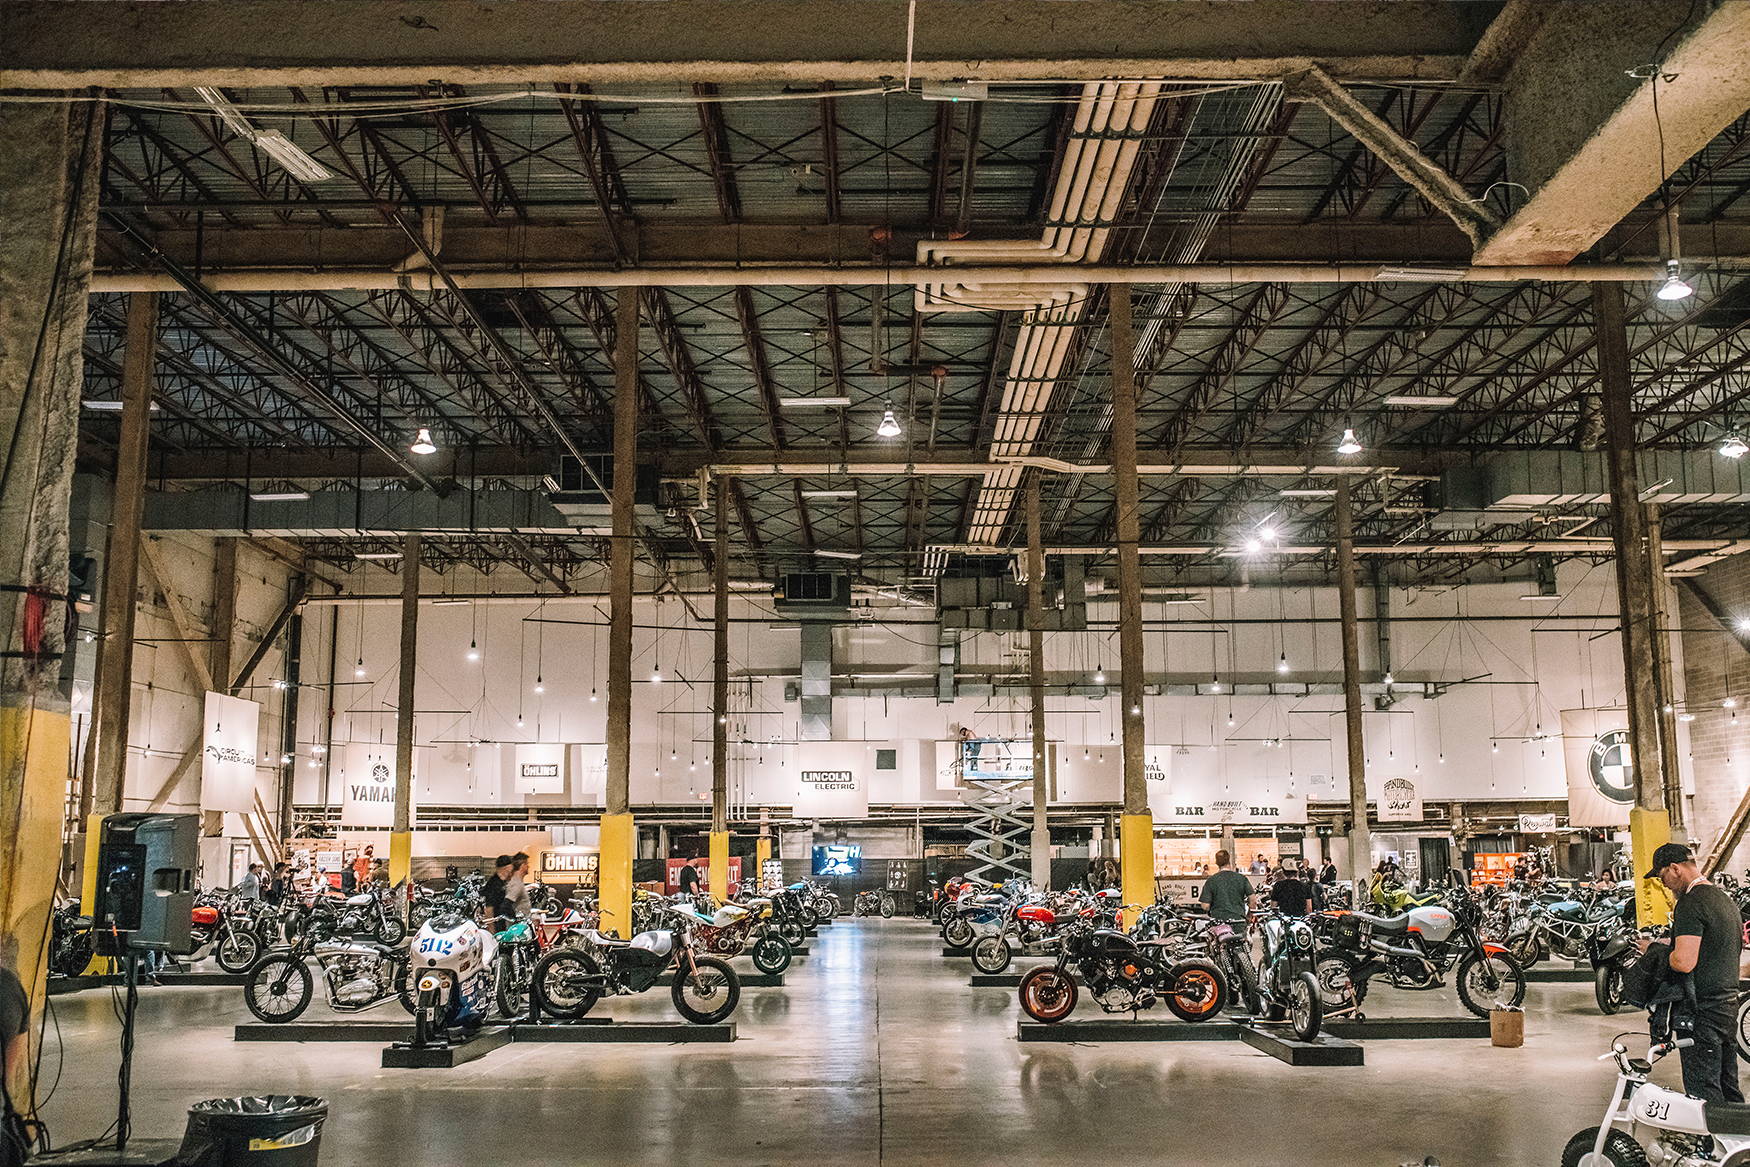 A photo of the Austin American-Statesman with motorcycles for the Handbuilt Motorcycle Show